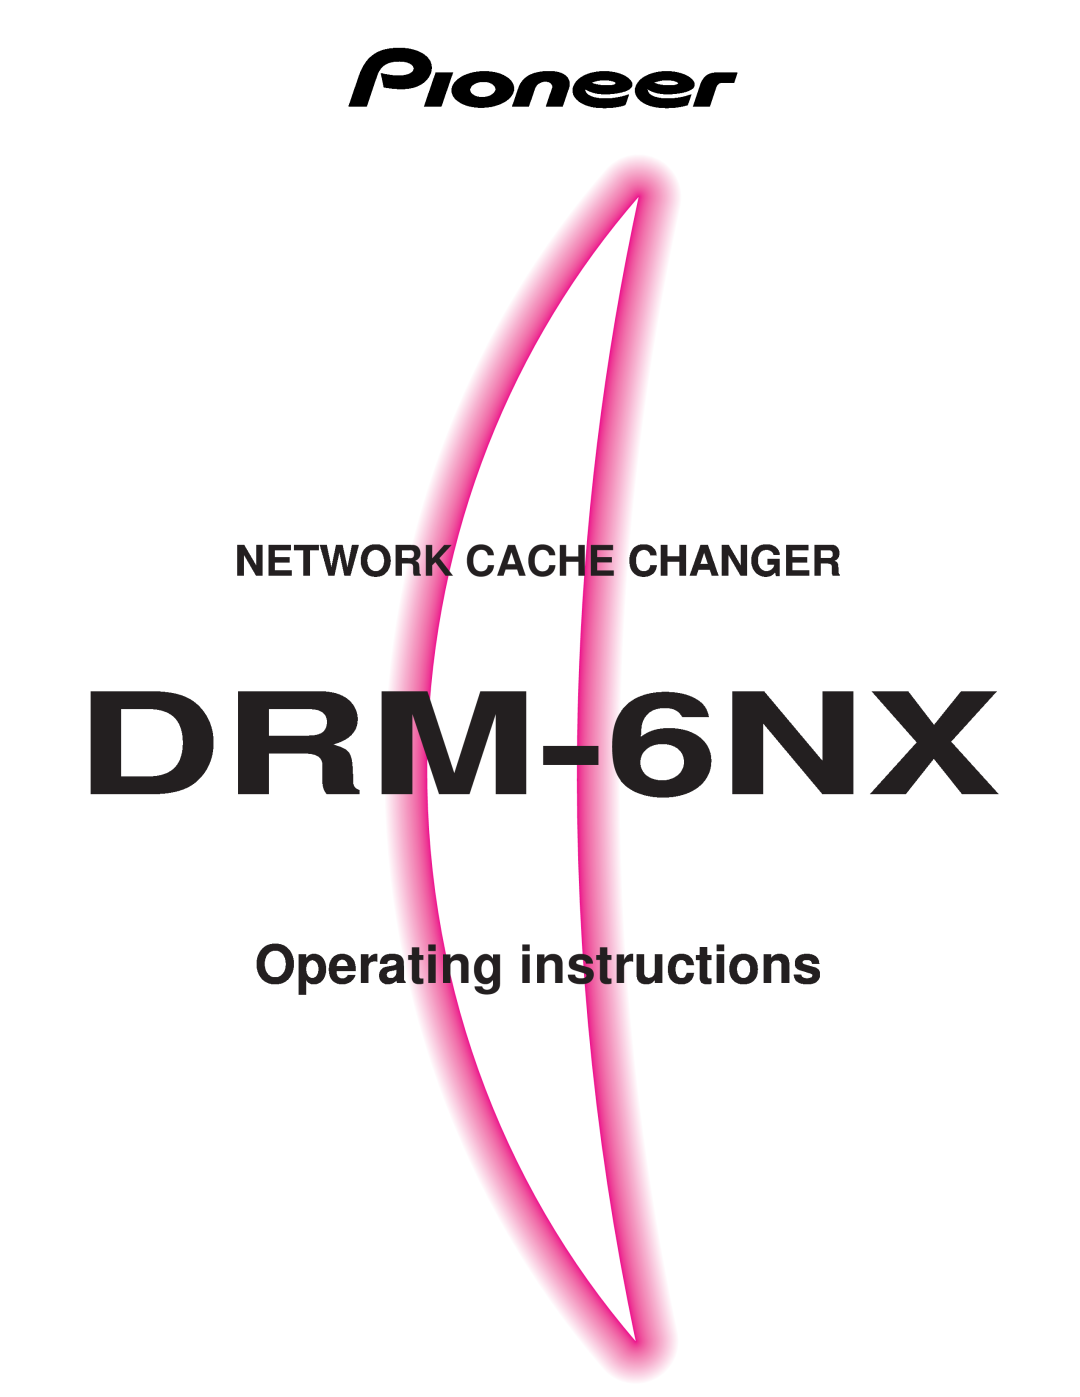 Pioneer DRM-6NX manual Operating instructions, Network Cache Changer 